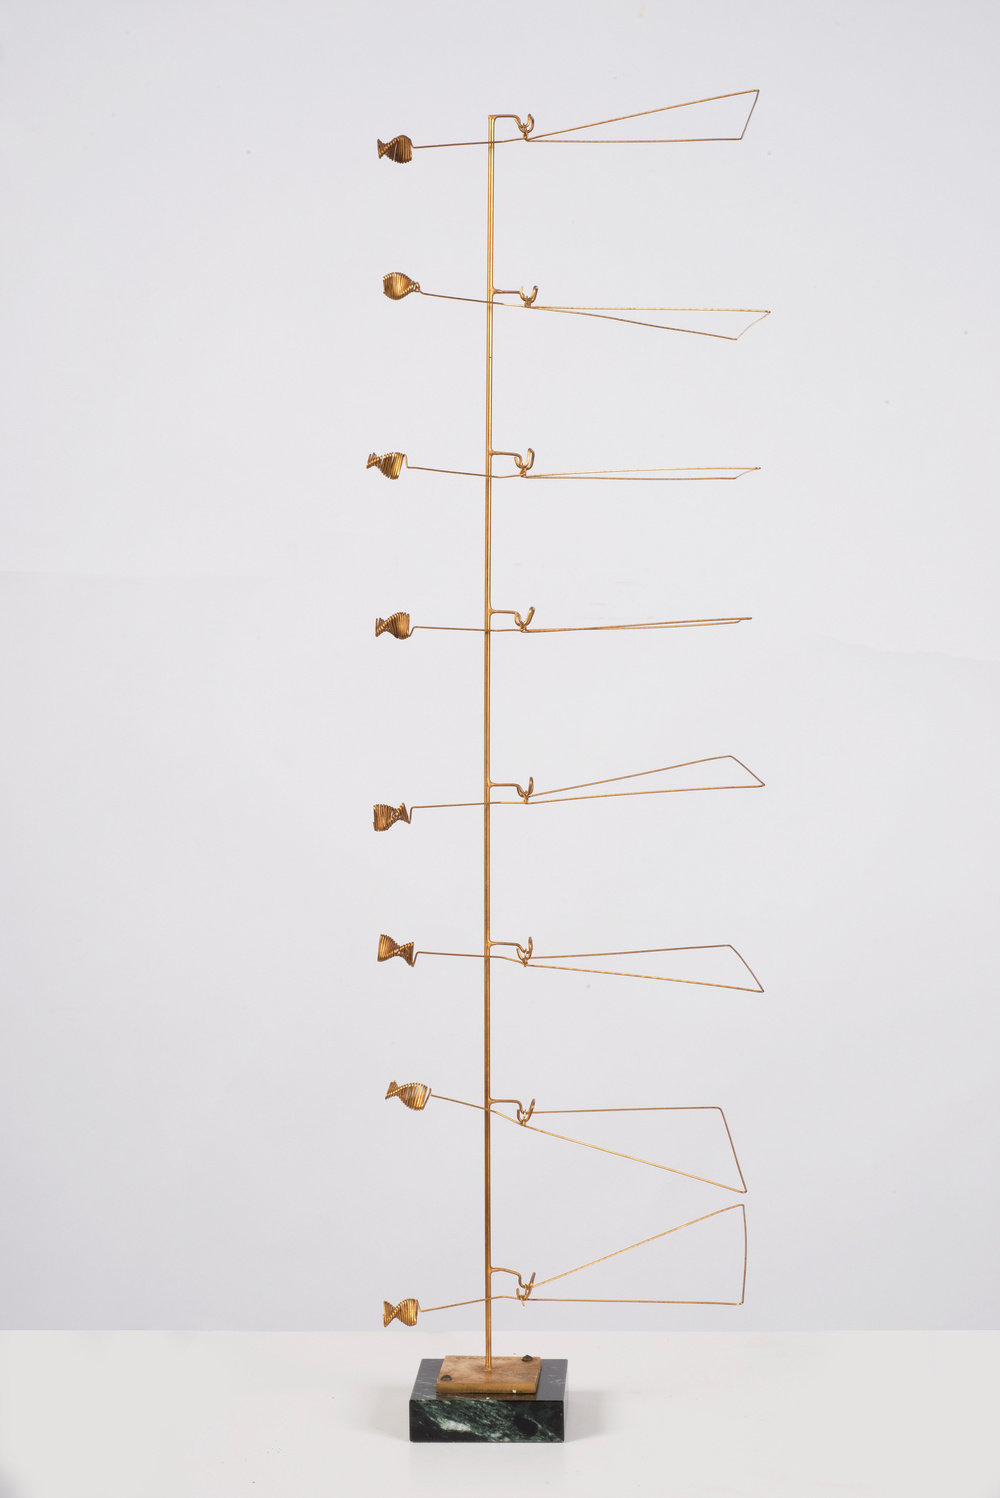 George rickey, column of eight triangles with spirals, view 1, 1973, gilded stainless steel wire, 25 x 8 in, non 53487, photo by orcutt